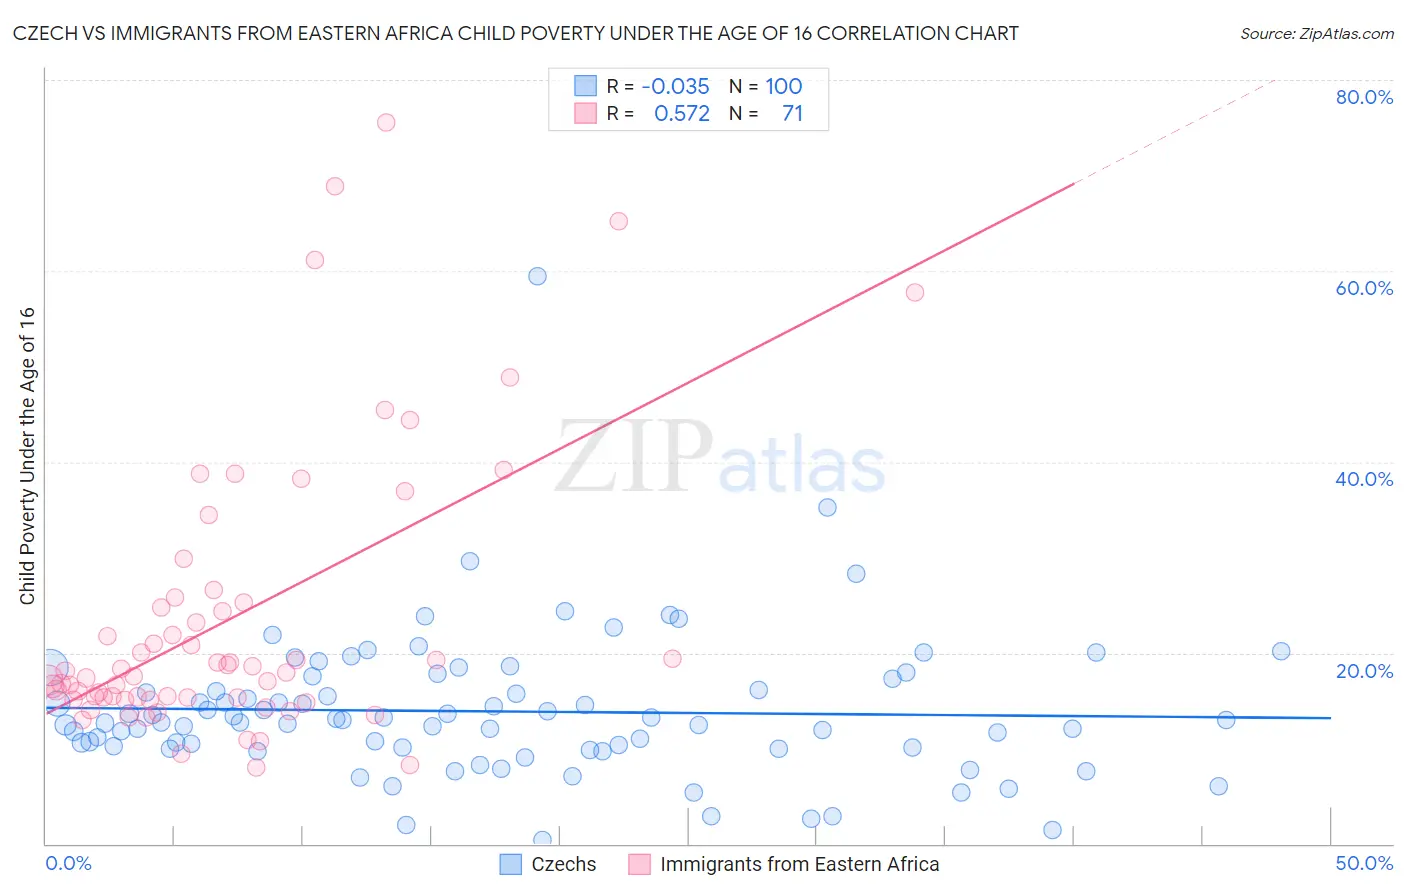 Czech vs Immigrants from Eastern Africa Child Poverty Under the Age of 16